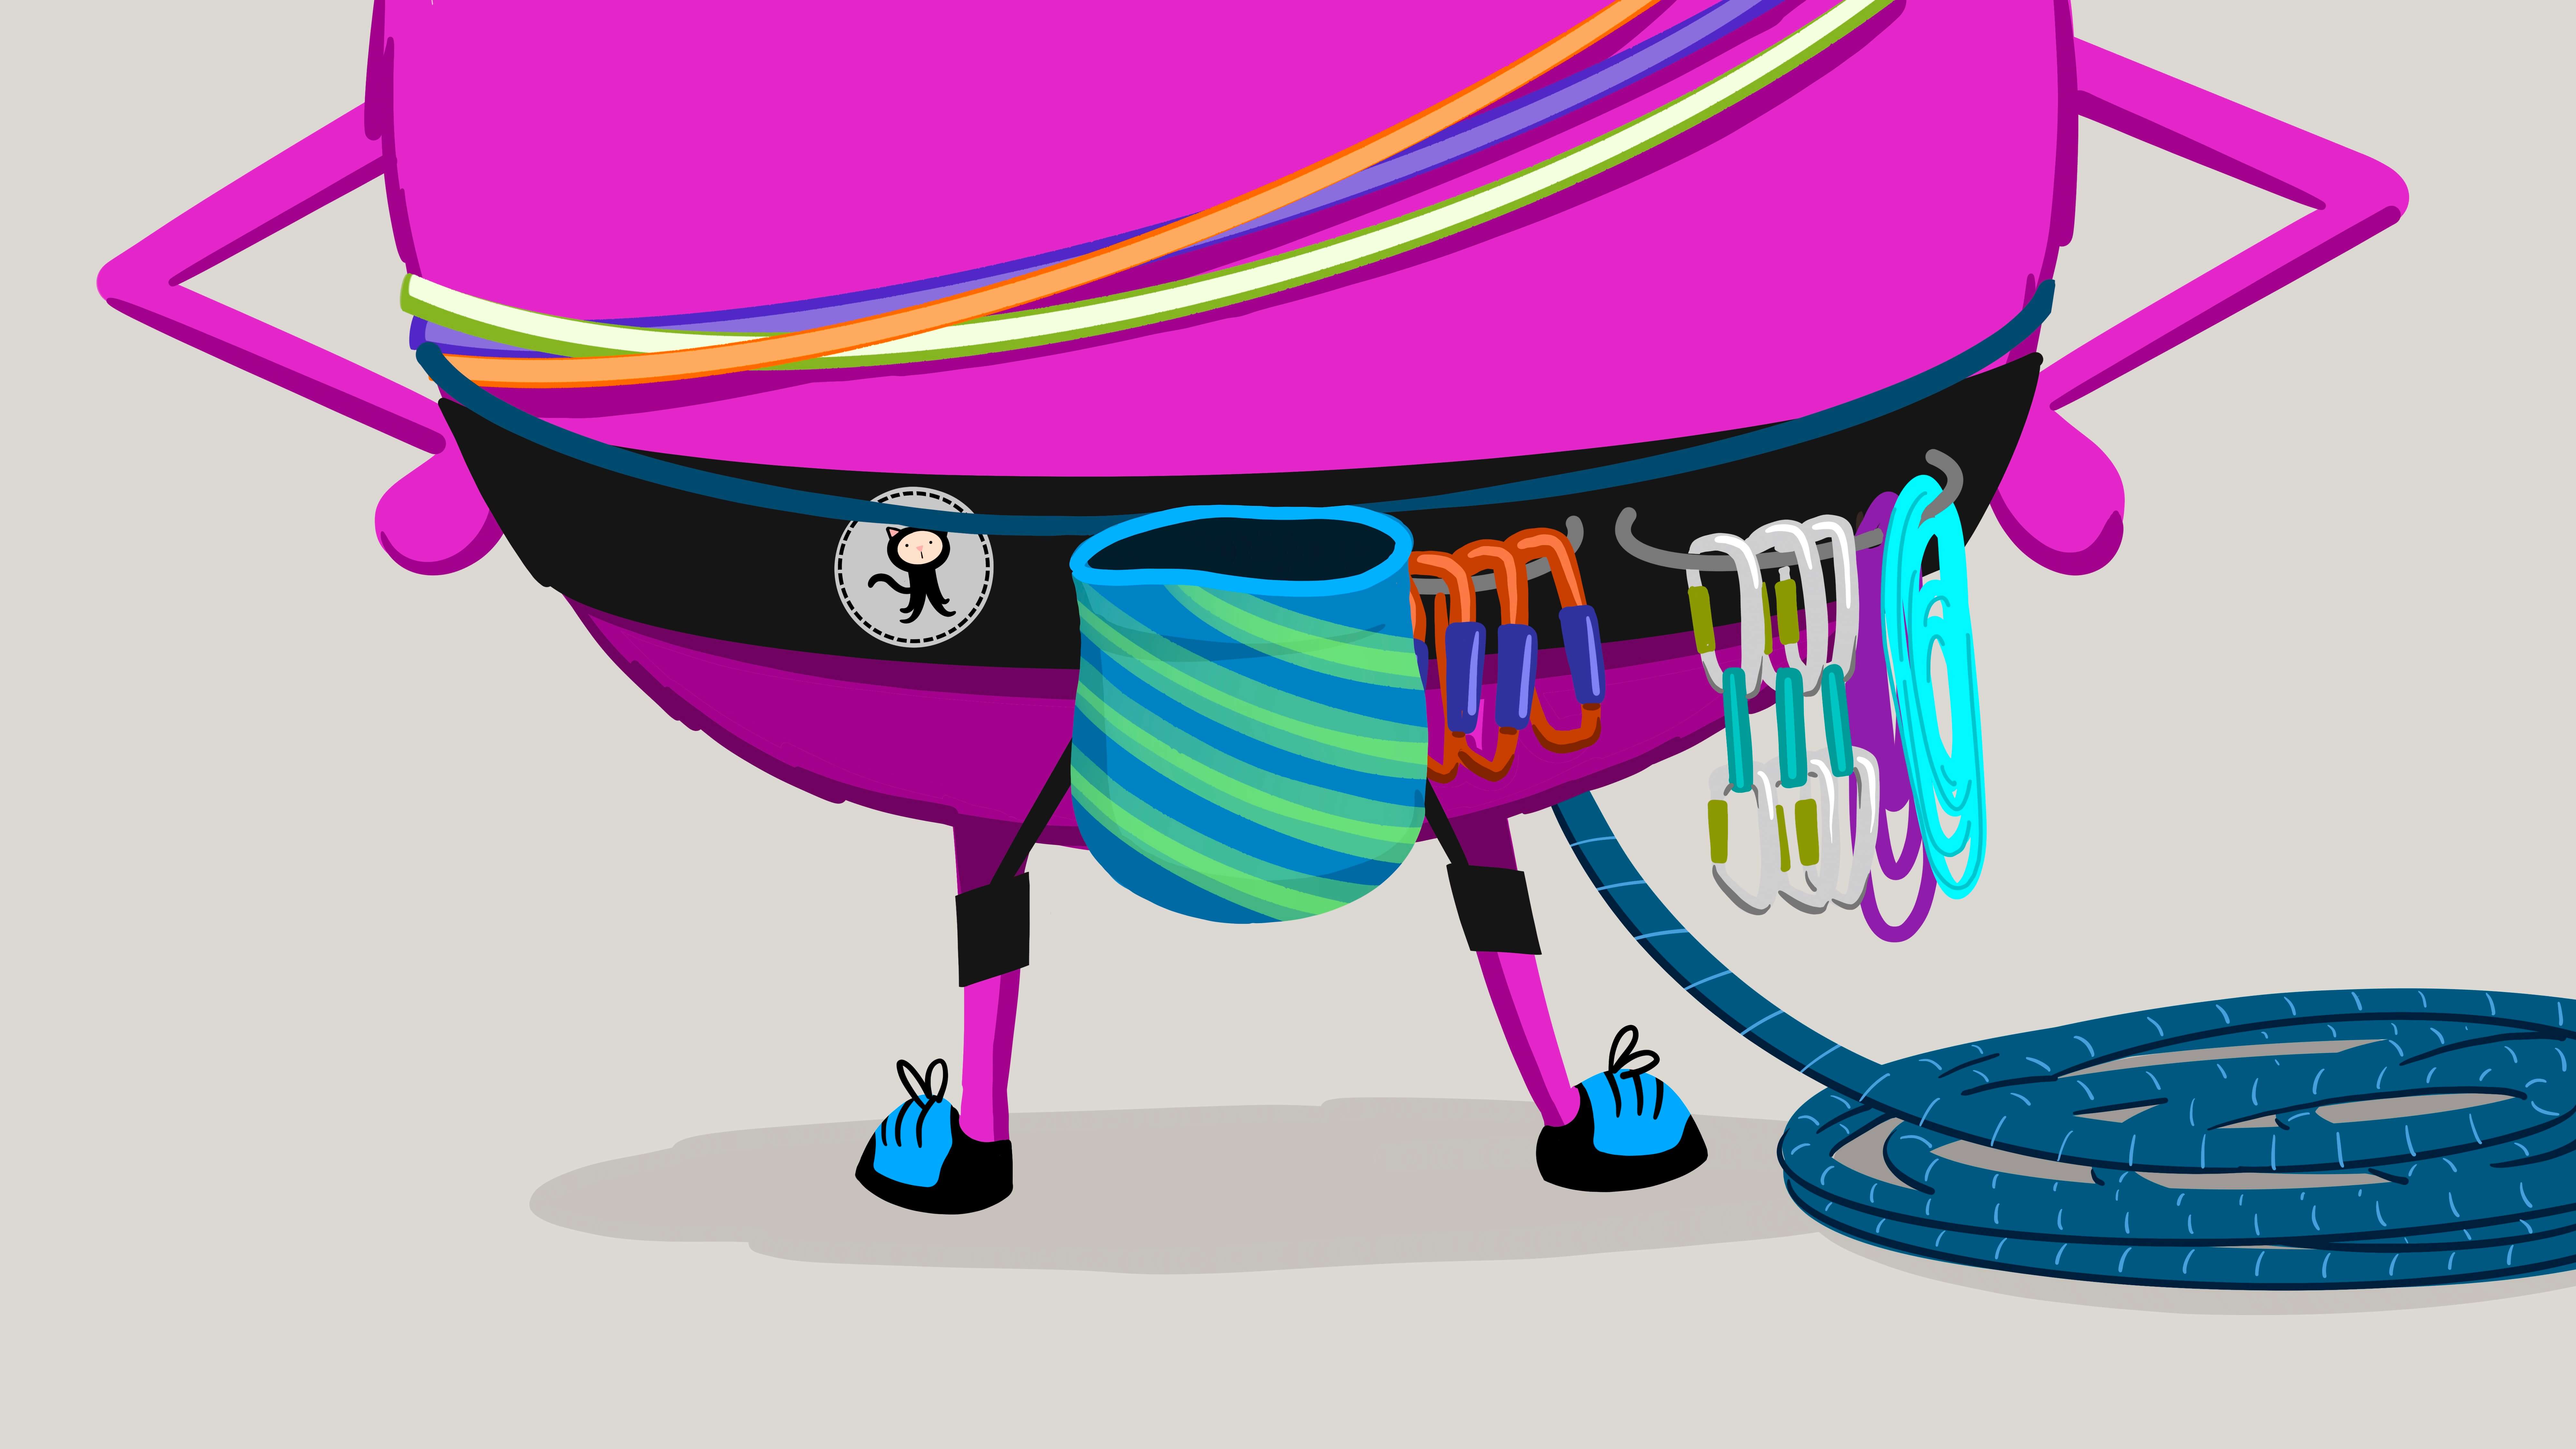 Partial rear view of a monster with image focusing on their safety harness with a GitHub Octocat logo, chalk bag, carabiners, and rope.